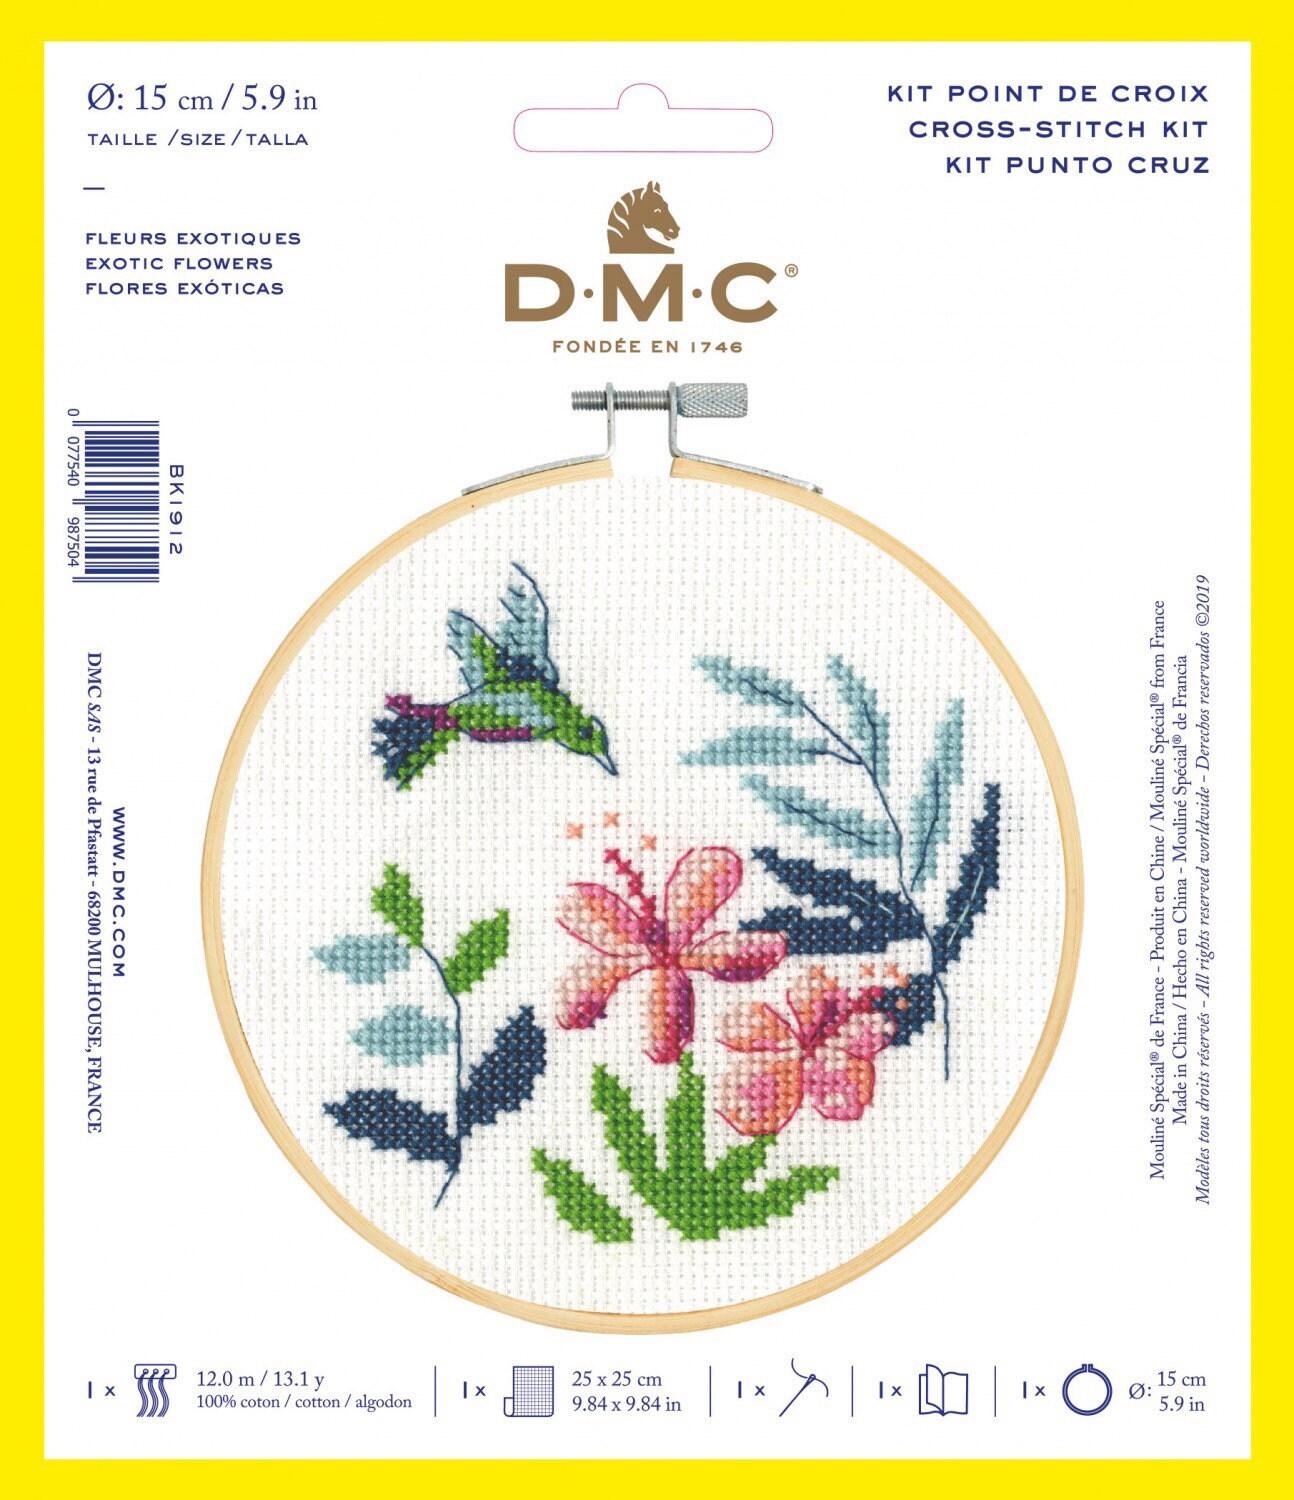 Hummingbird Cross Stitch Kit - Pattern, Floss, Fabric, Hoop and Needle included